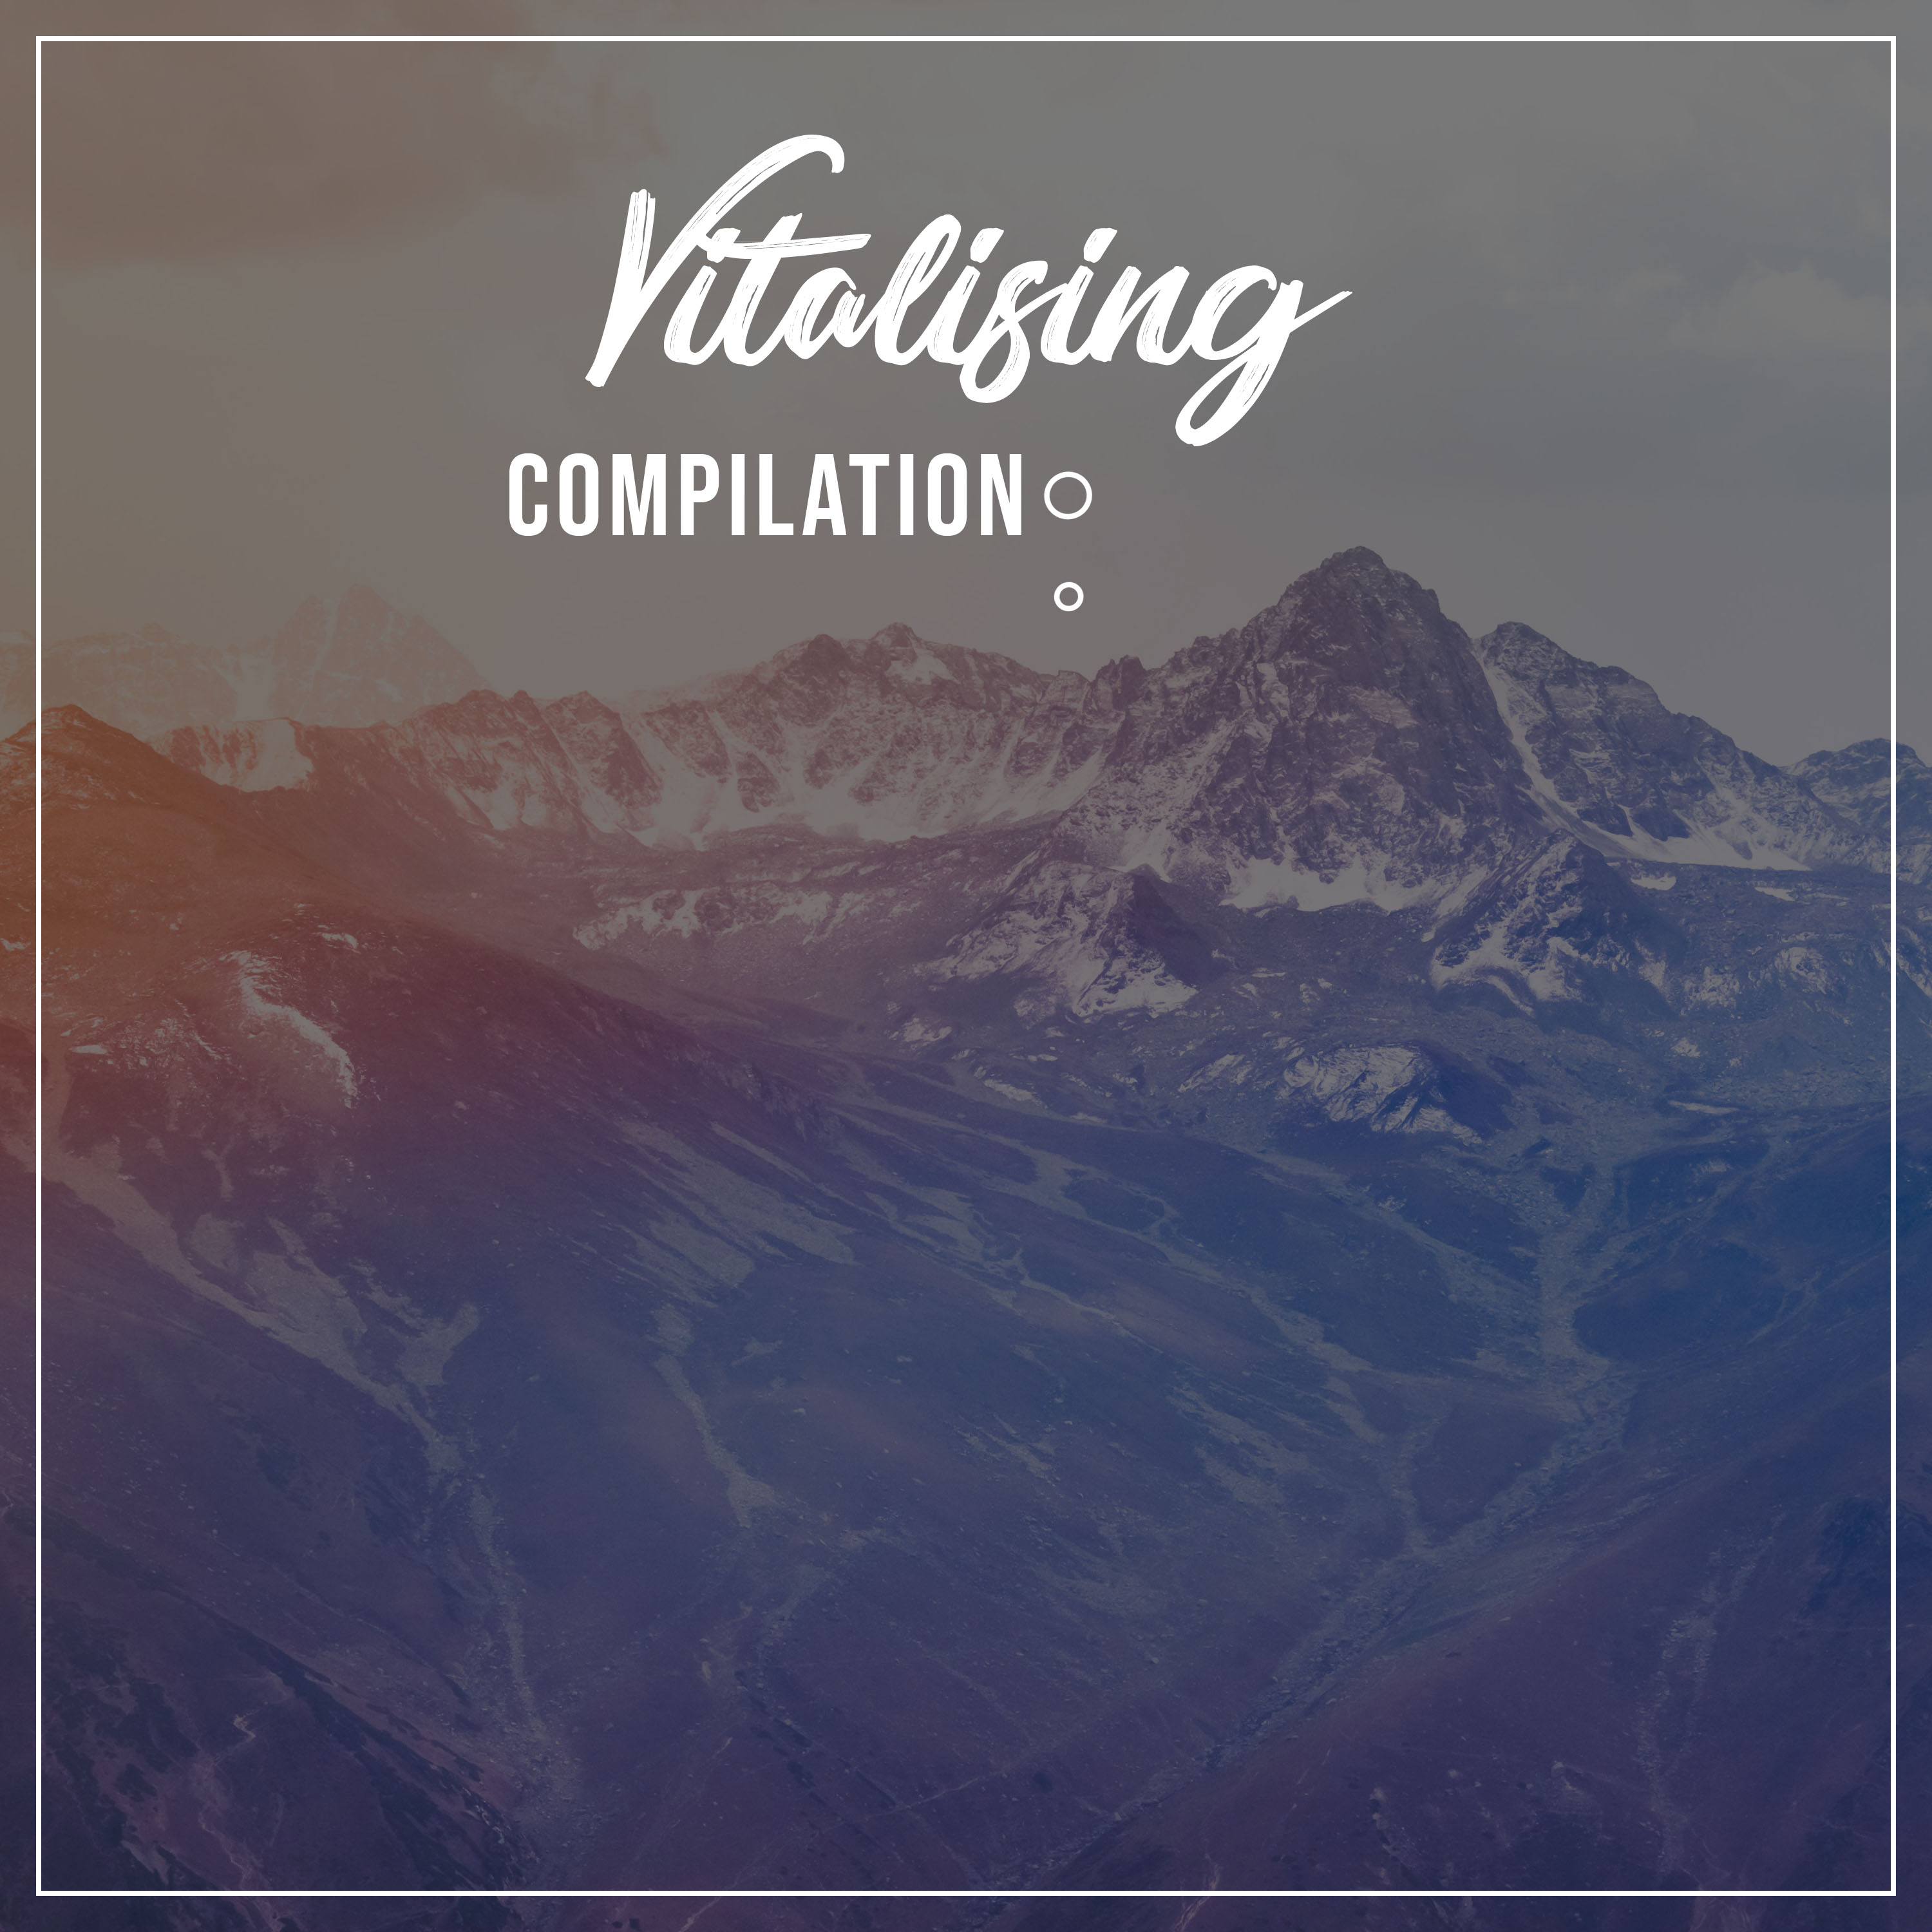 #17 Vitalising Compilation for Calming Yoga Workout